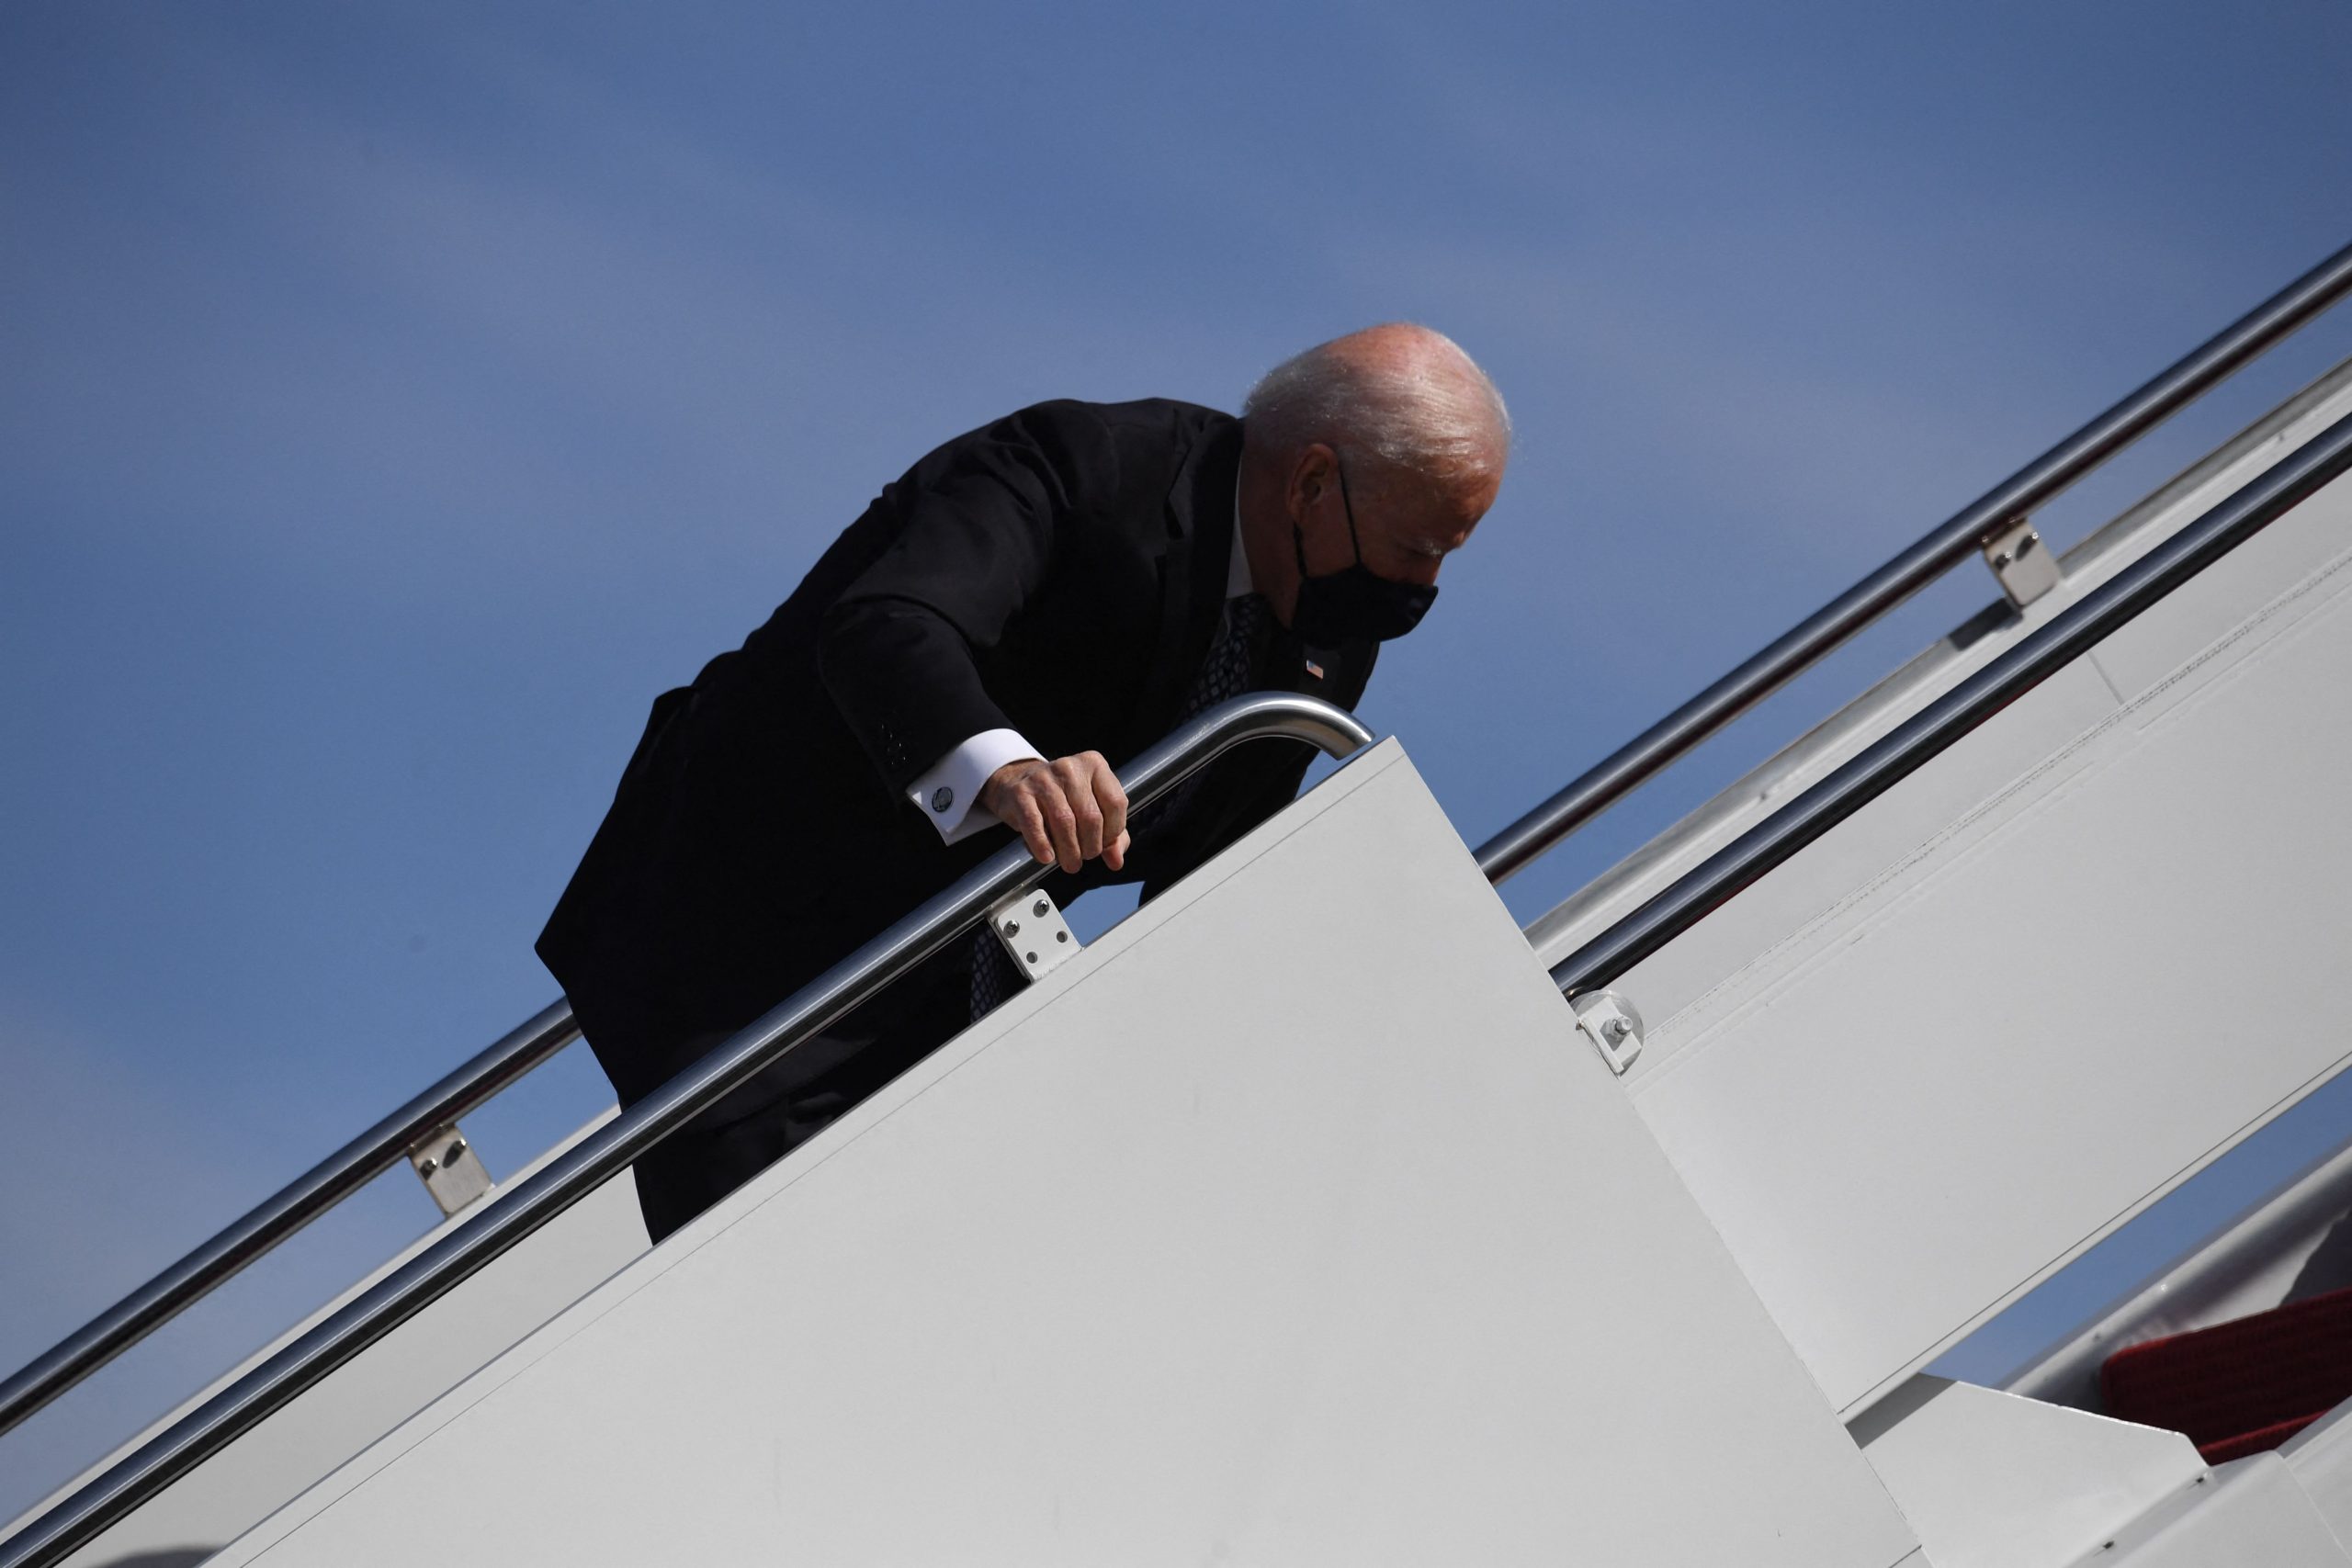 President Joe Biden not the first US leader to trip on Air Force One’s stairway